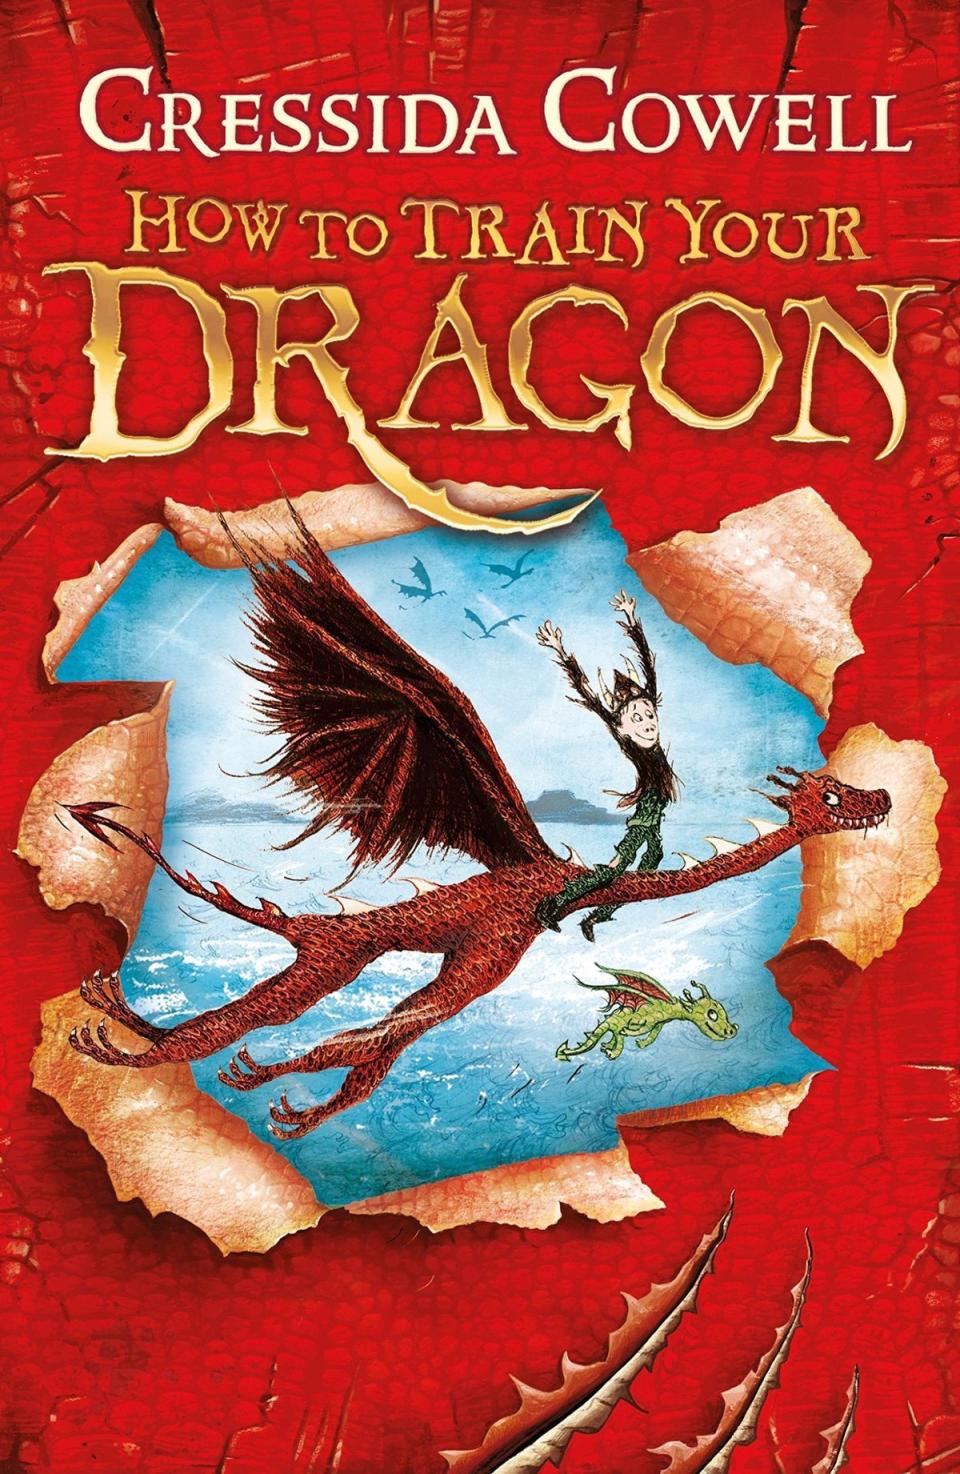 28. How to Train Your Dragon by Cressida Cowell (2003): 